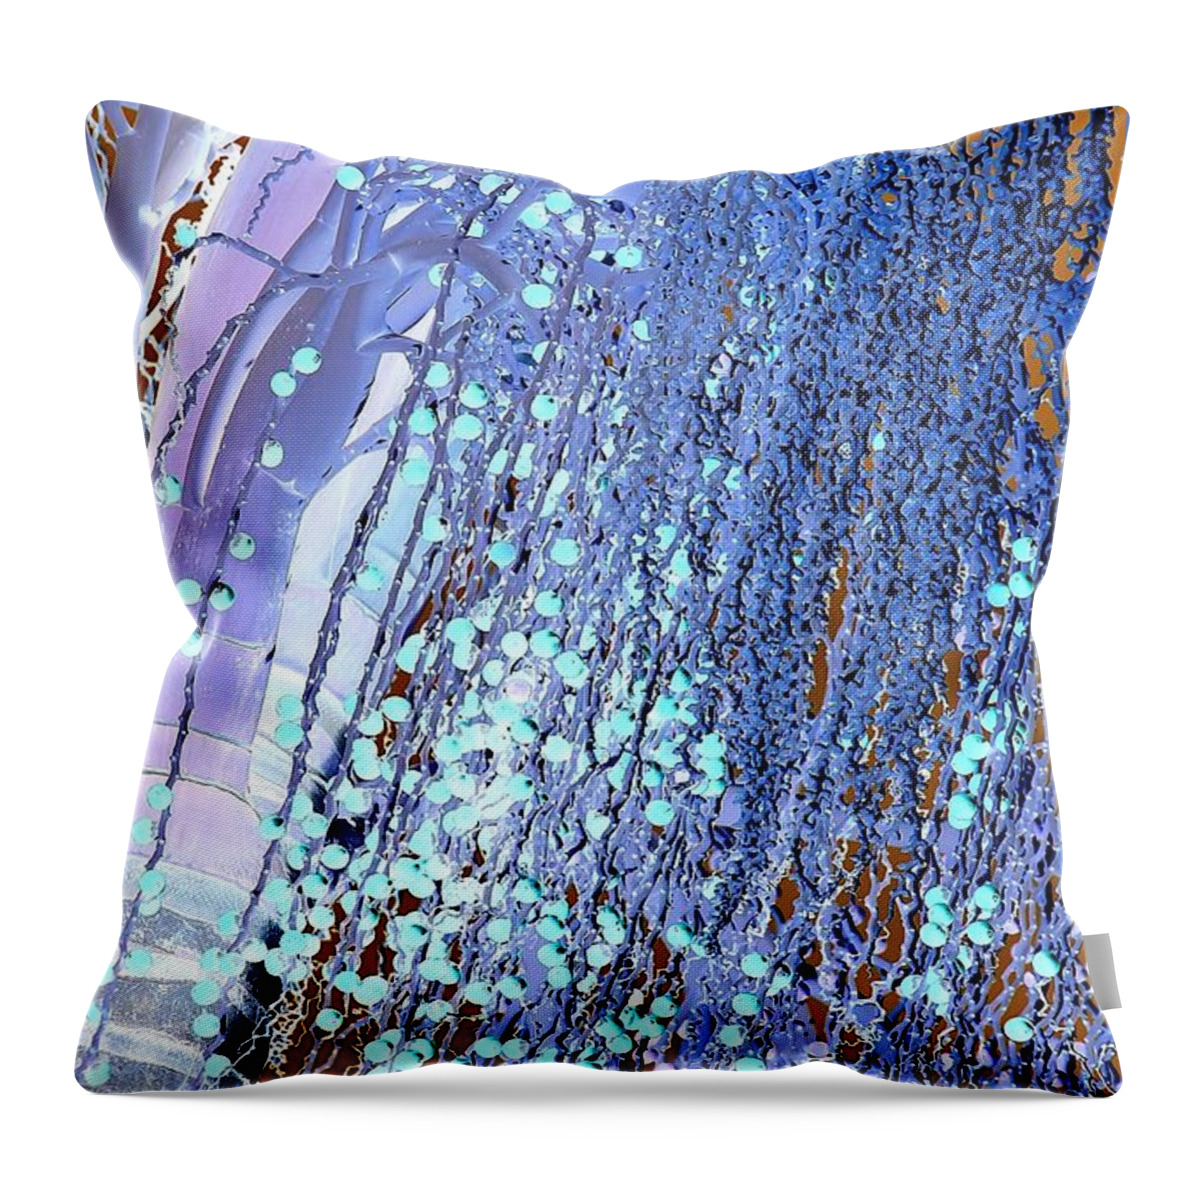 Surreal-nature-photos Throw Pillow featuring the digital art Overflowing by John Hintz